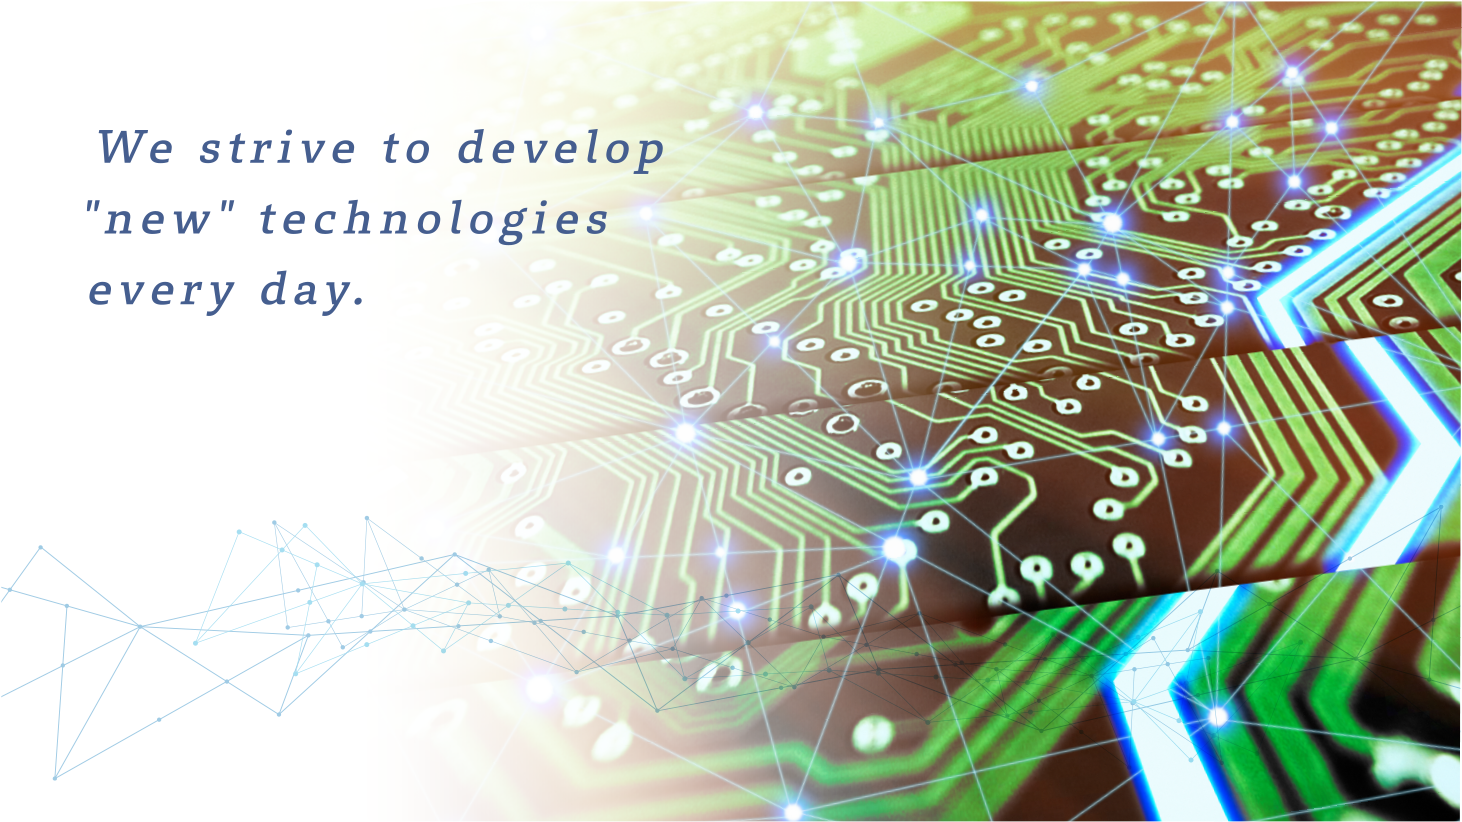 We strive to develop 'new' technologies every day.